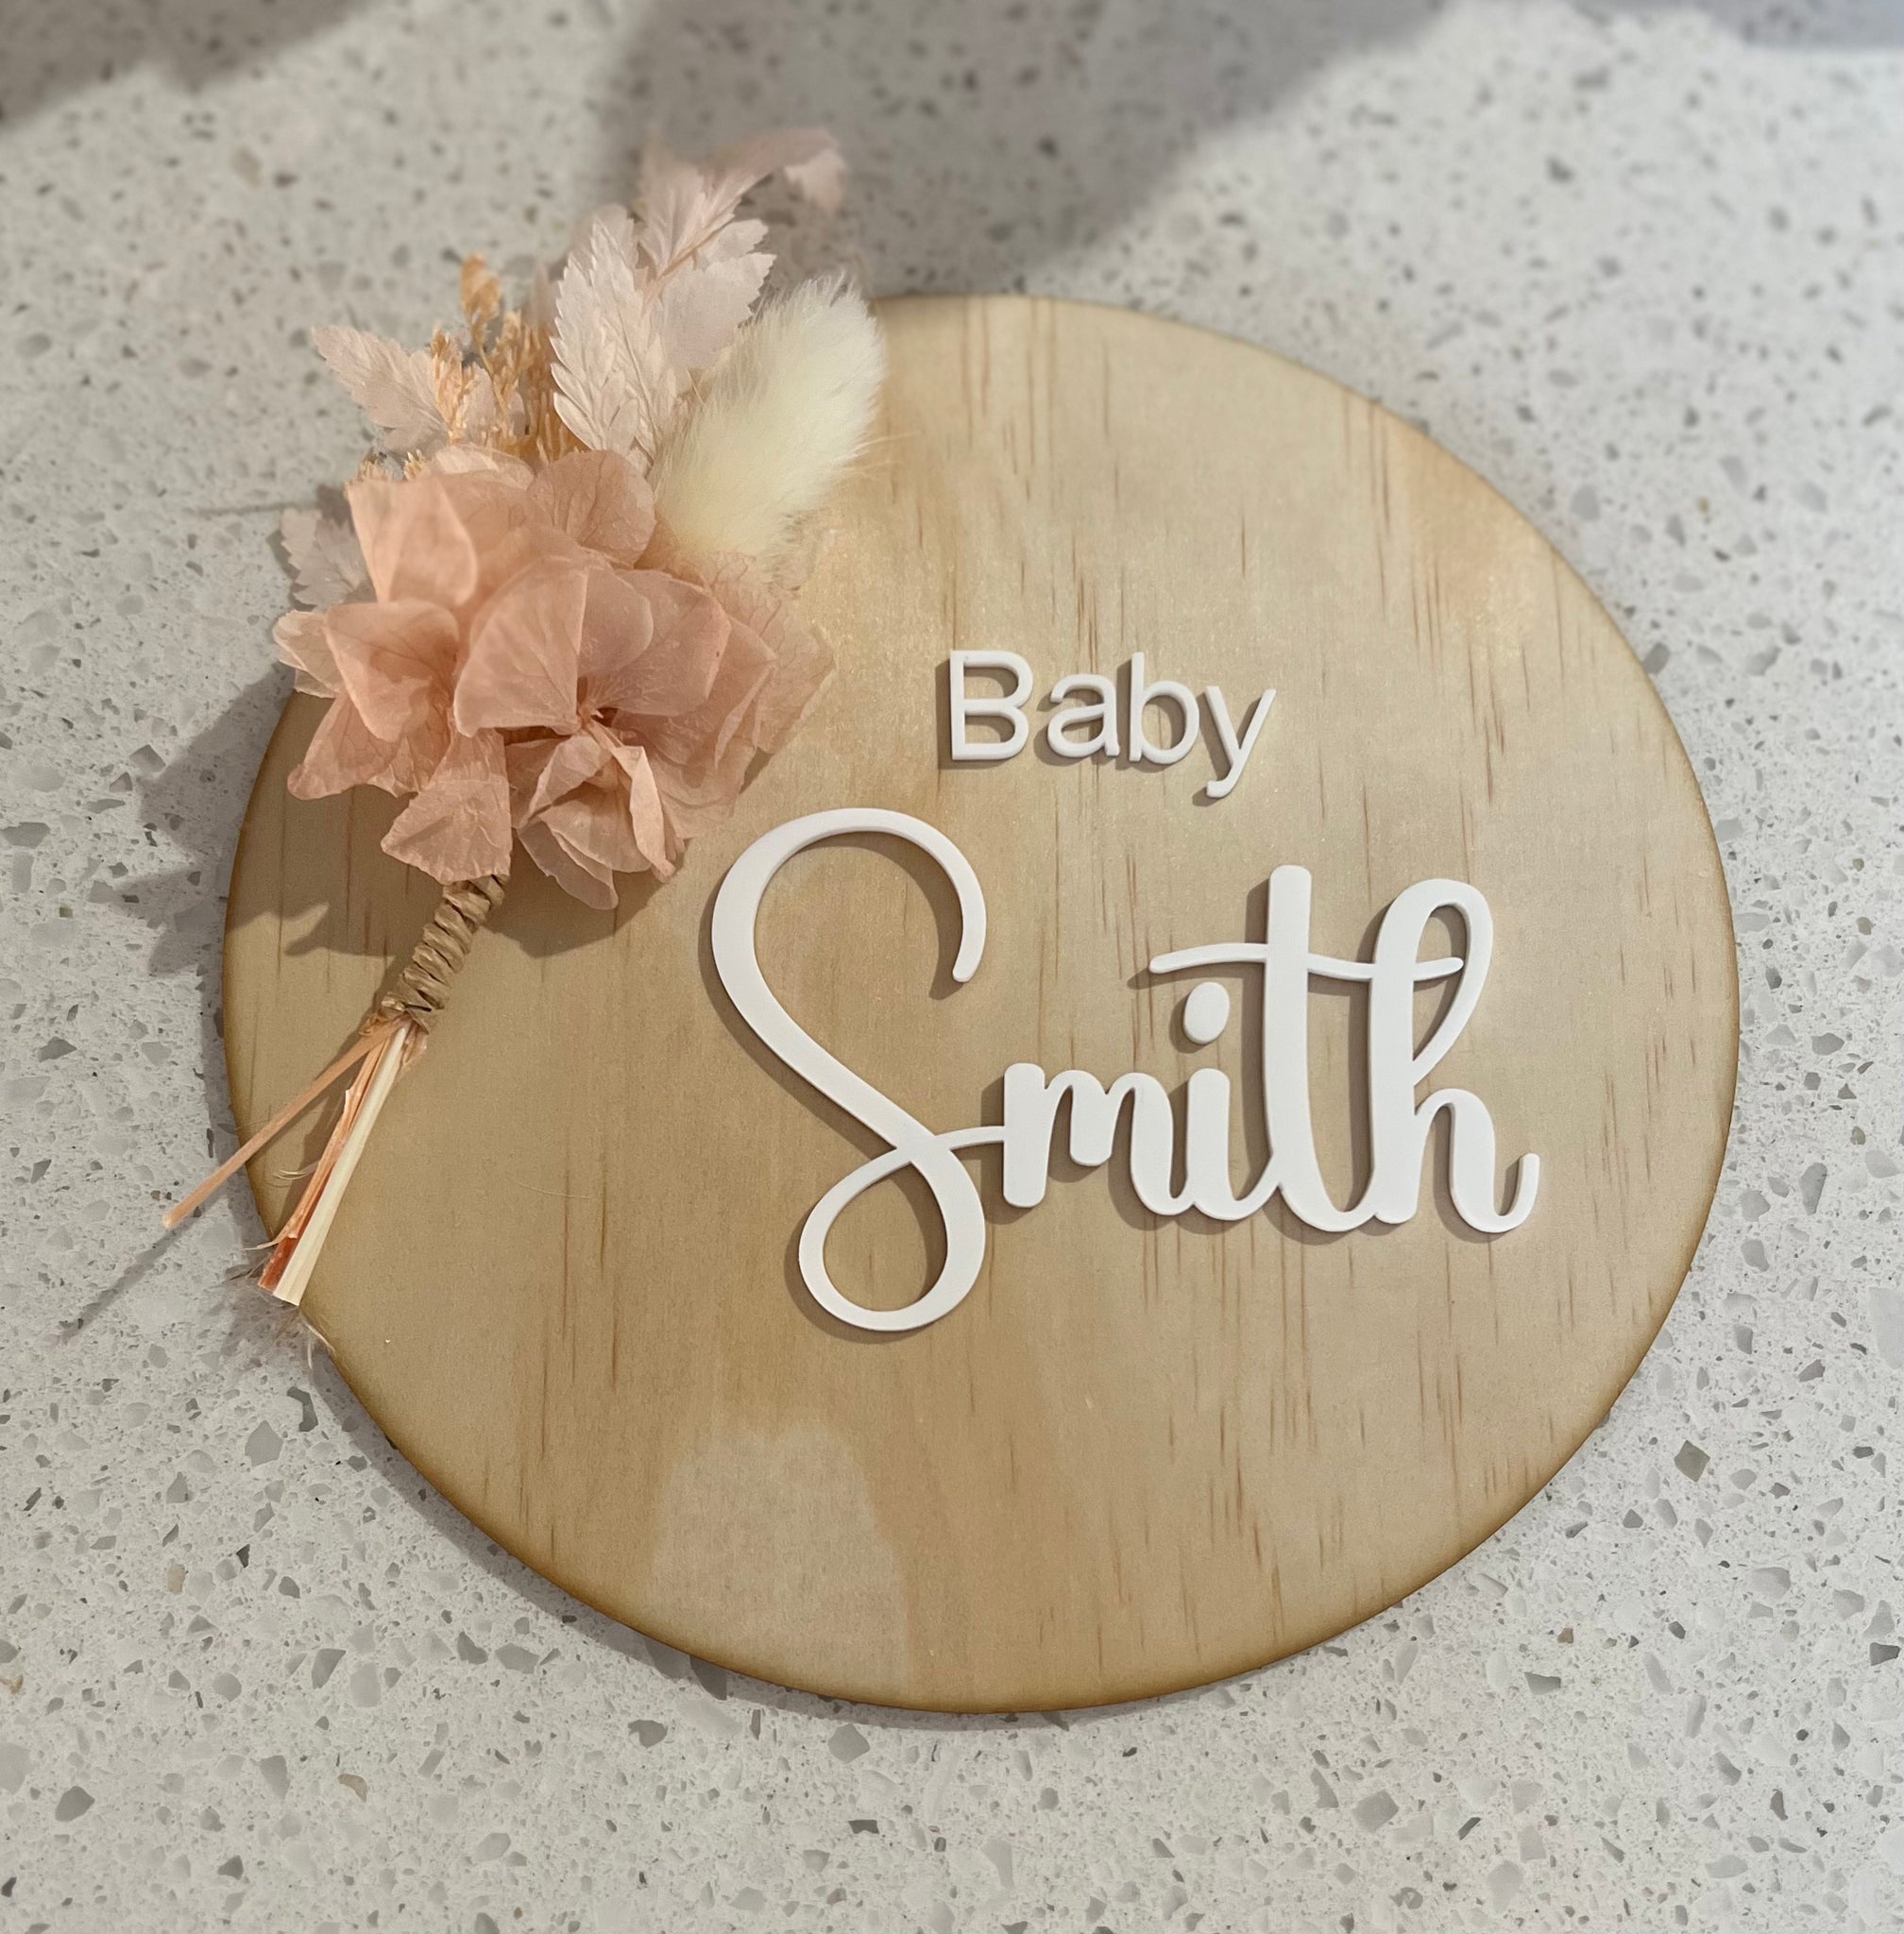 Baby announcement plaque with floral